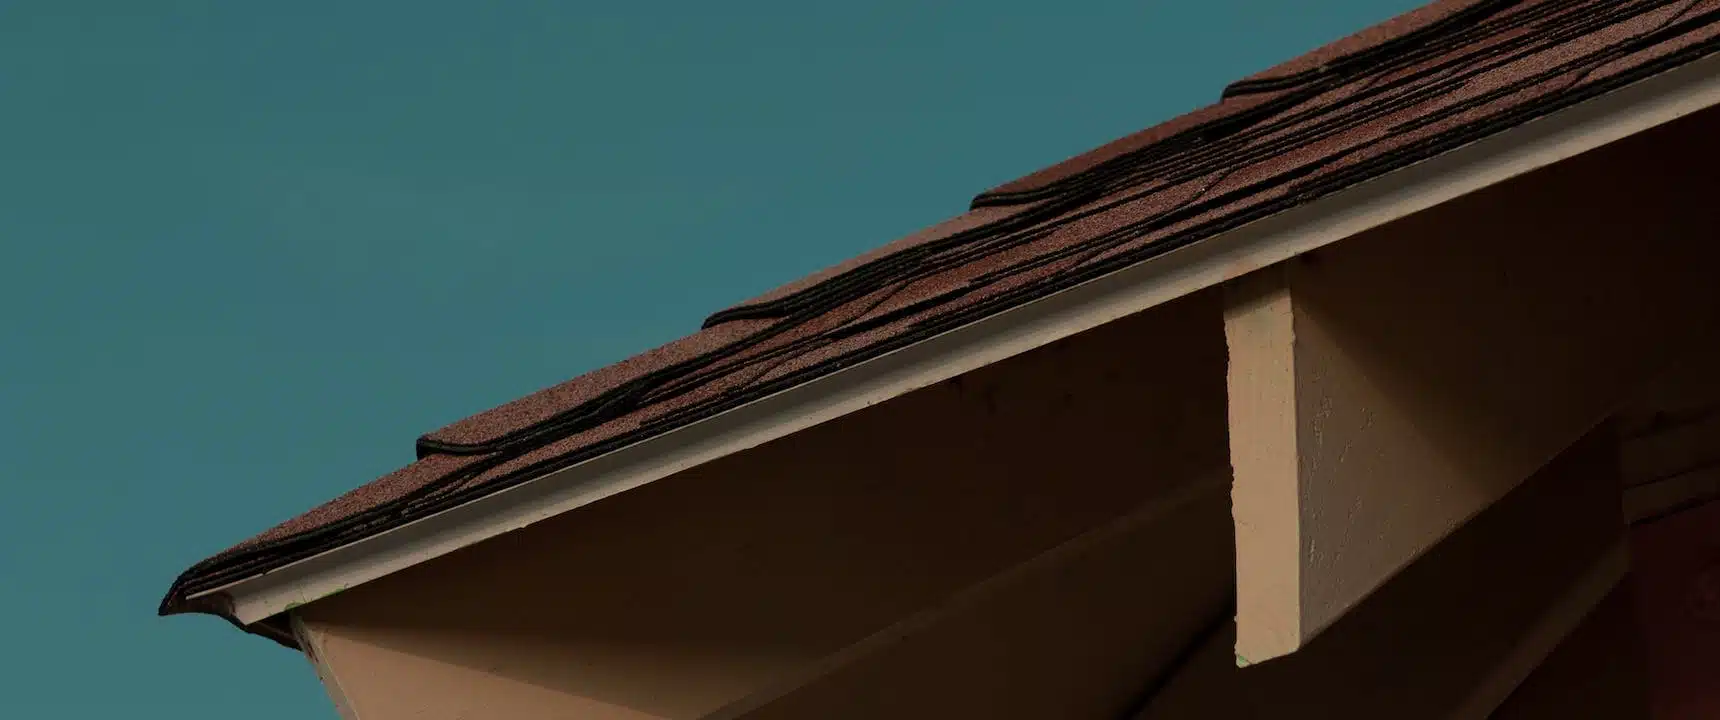 roof of a house : building a roof